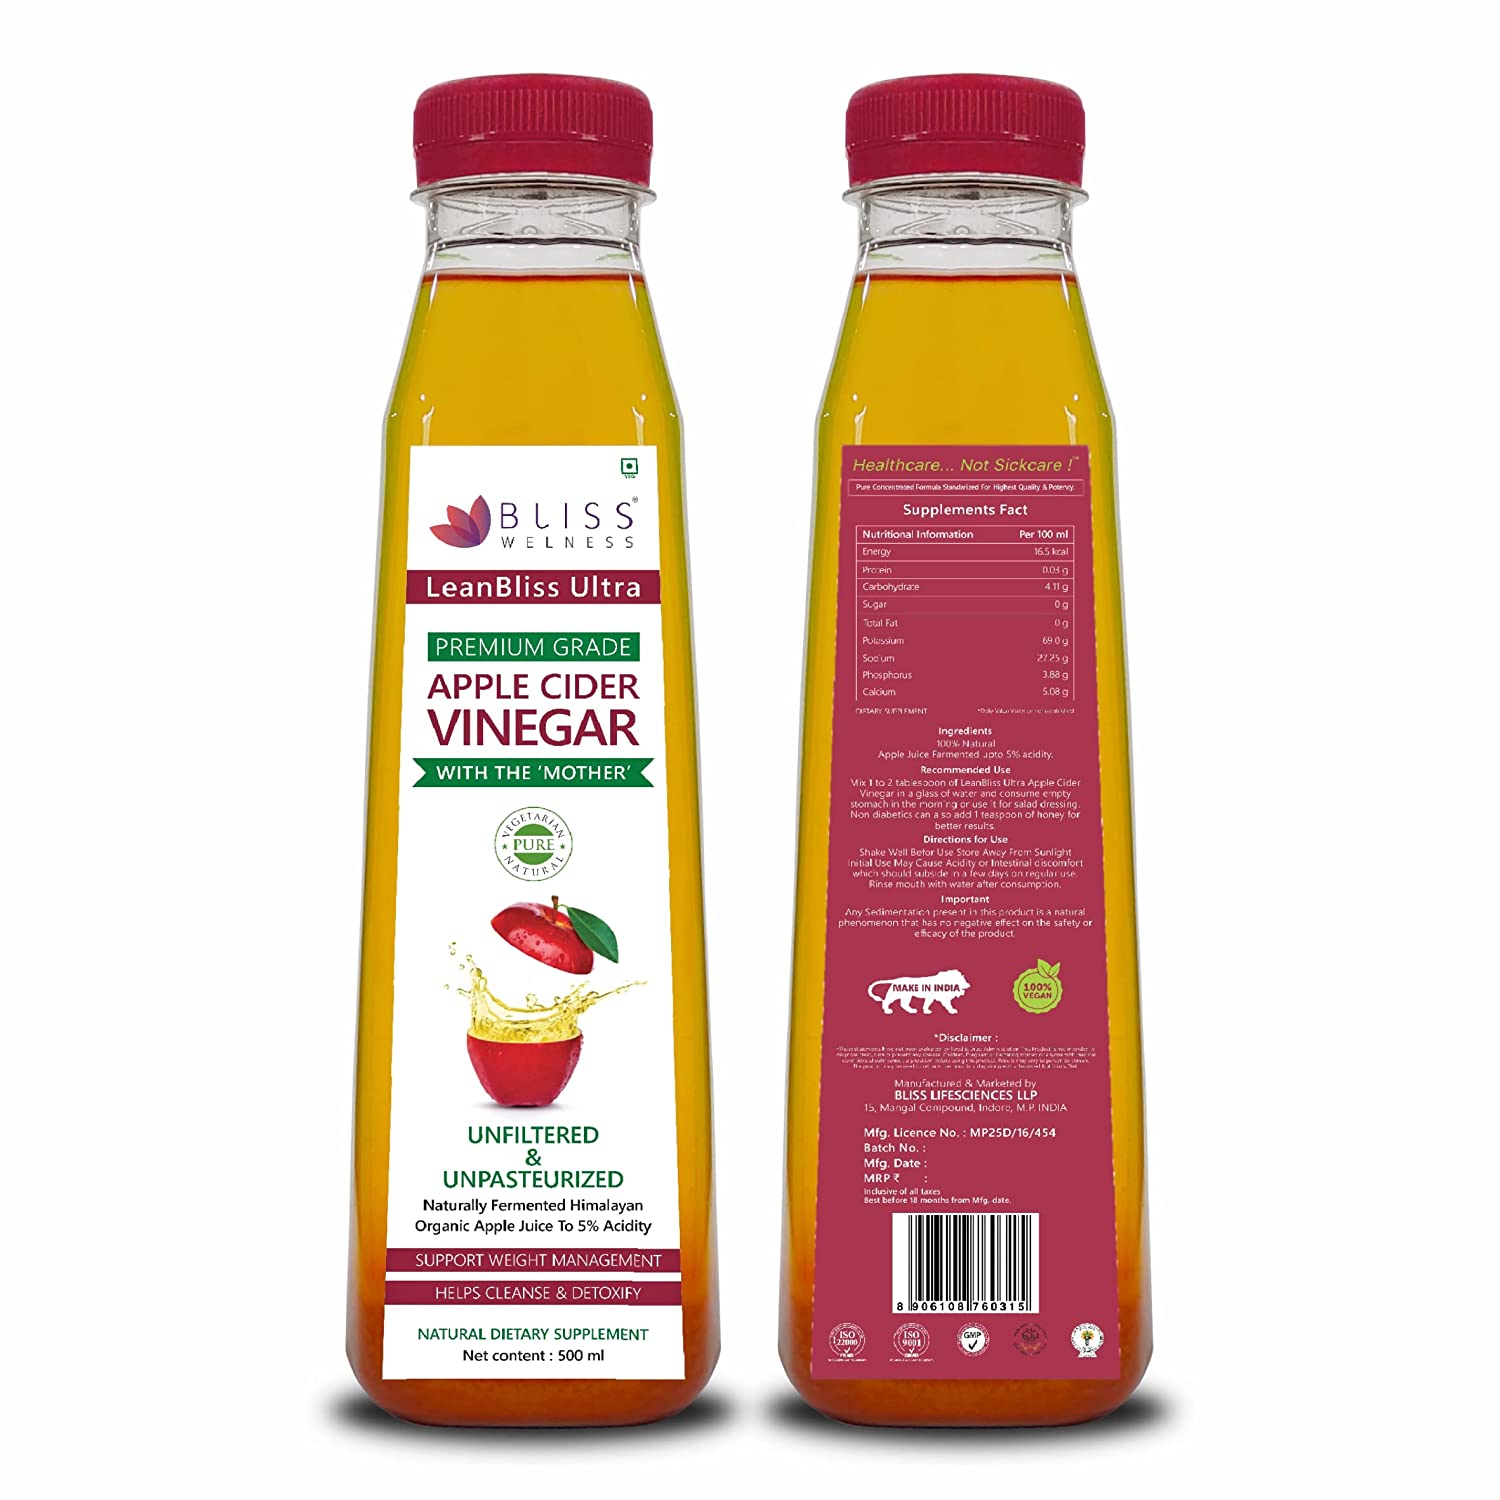 apple cider vinegar with mother organic acv weight loss raw skin hair face detox strand concentrate himalayan fat energy burn wash gummies